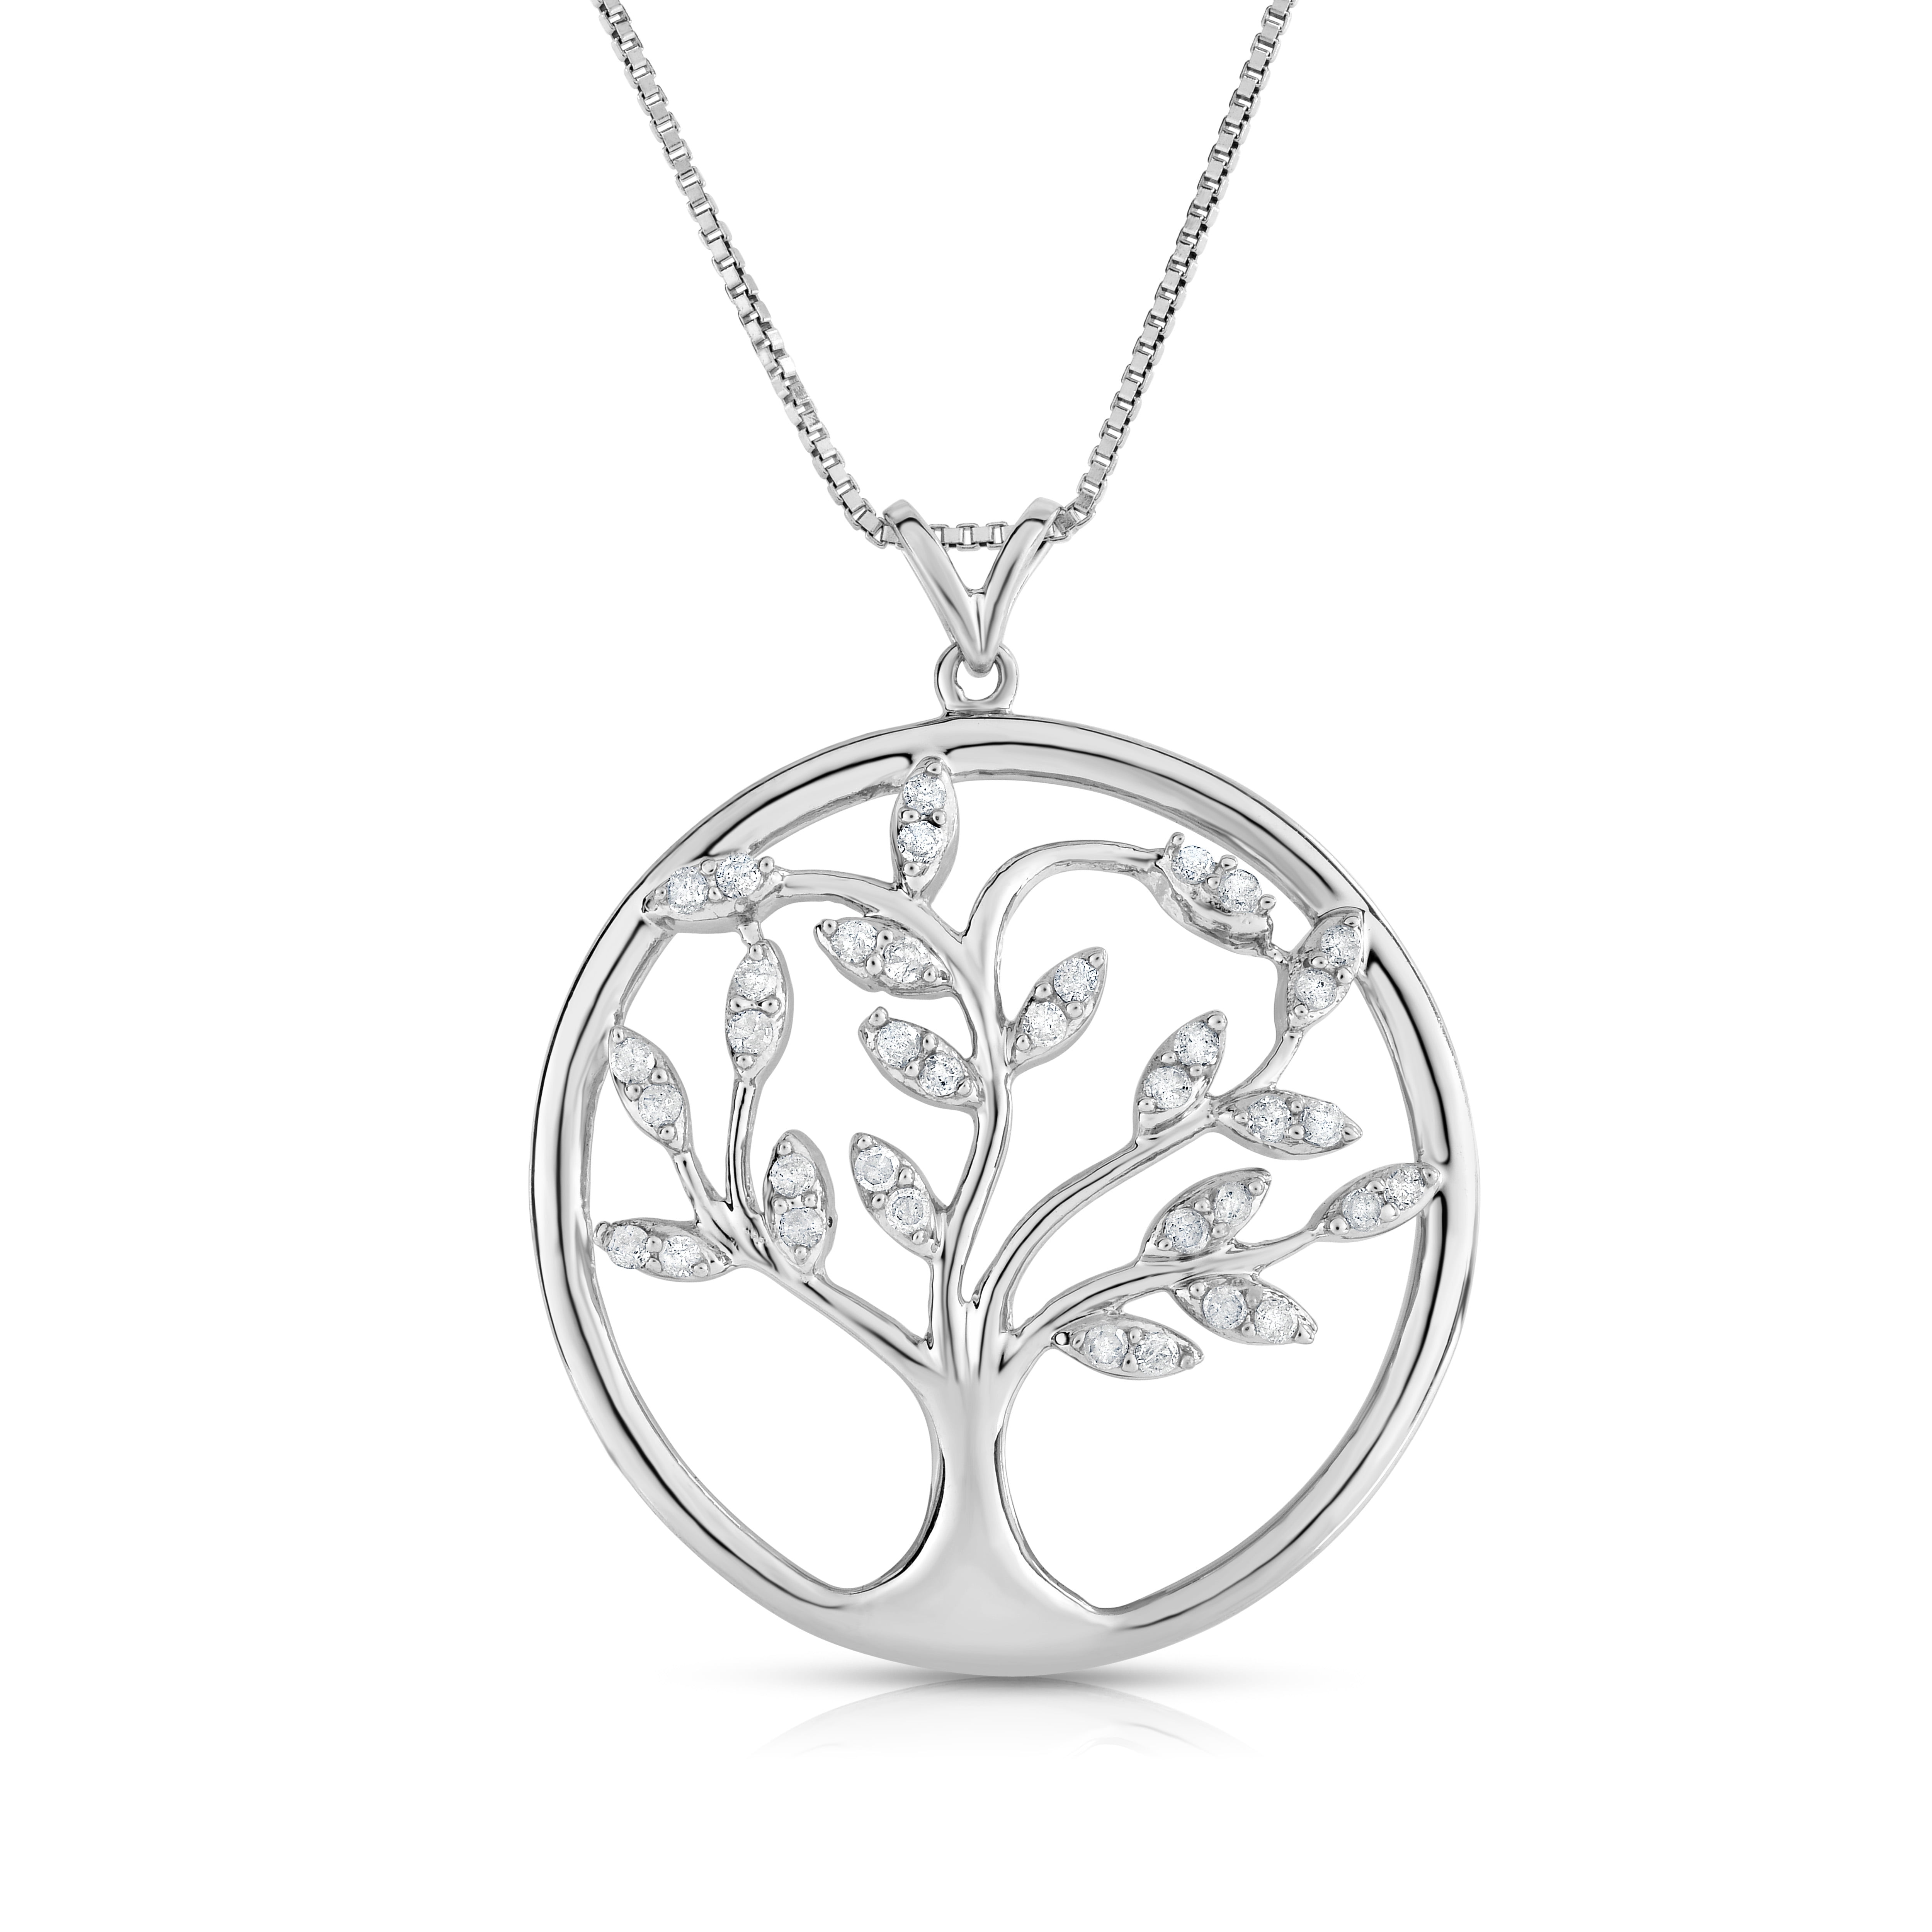 Natalia Drake 1/4 Cttw Diamond Tree Necklace in Rhodium Plated Sterling  Silver (Color HI / Clarity I2)